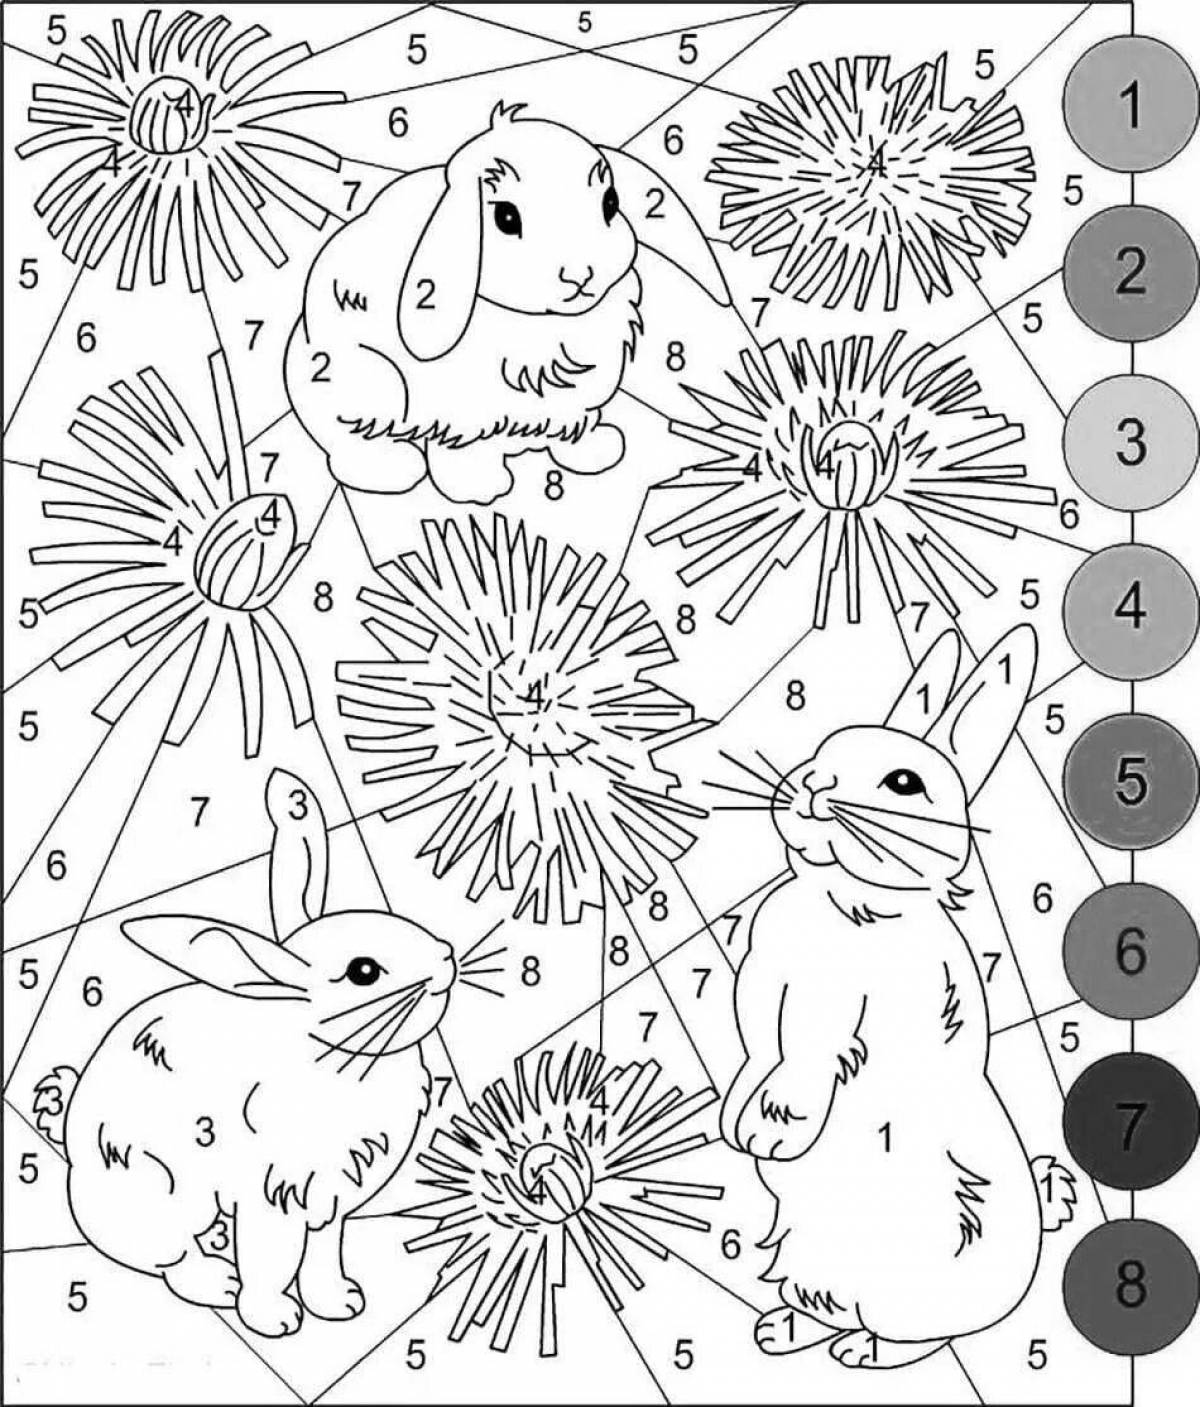 Charming coloring book what is the name of the number